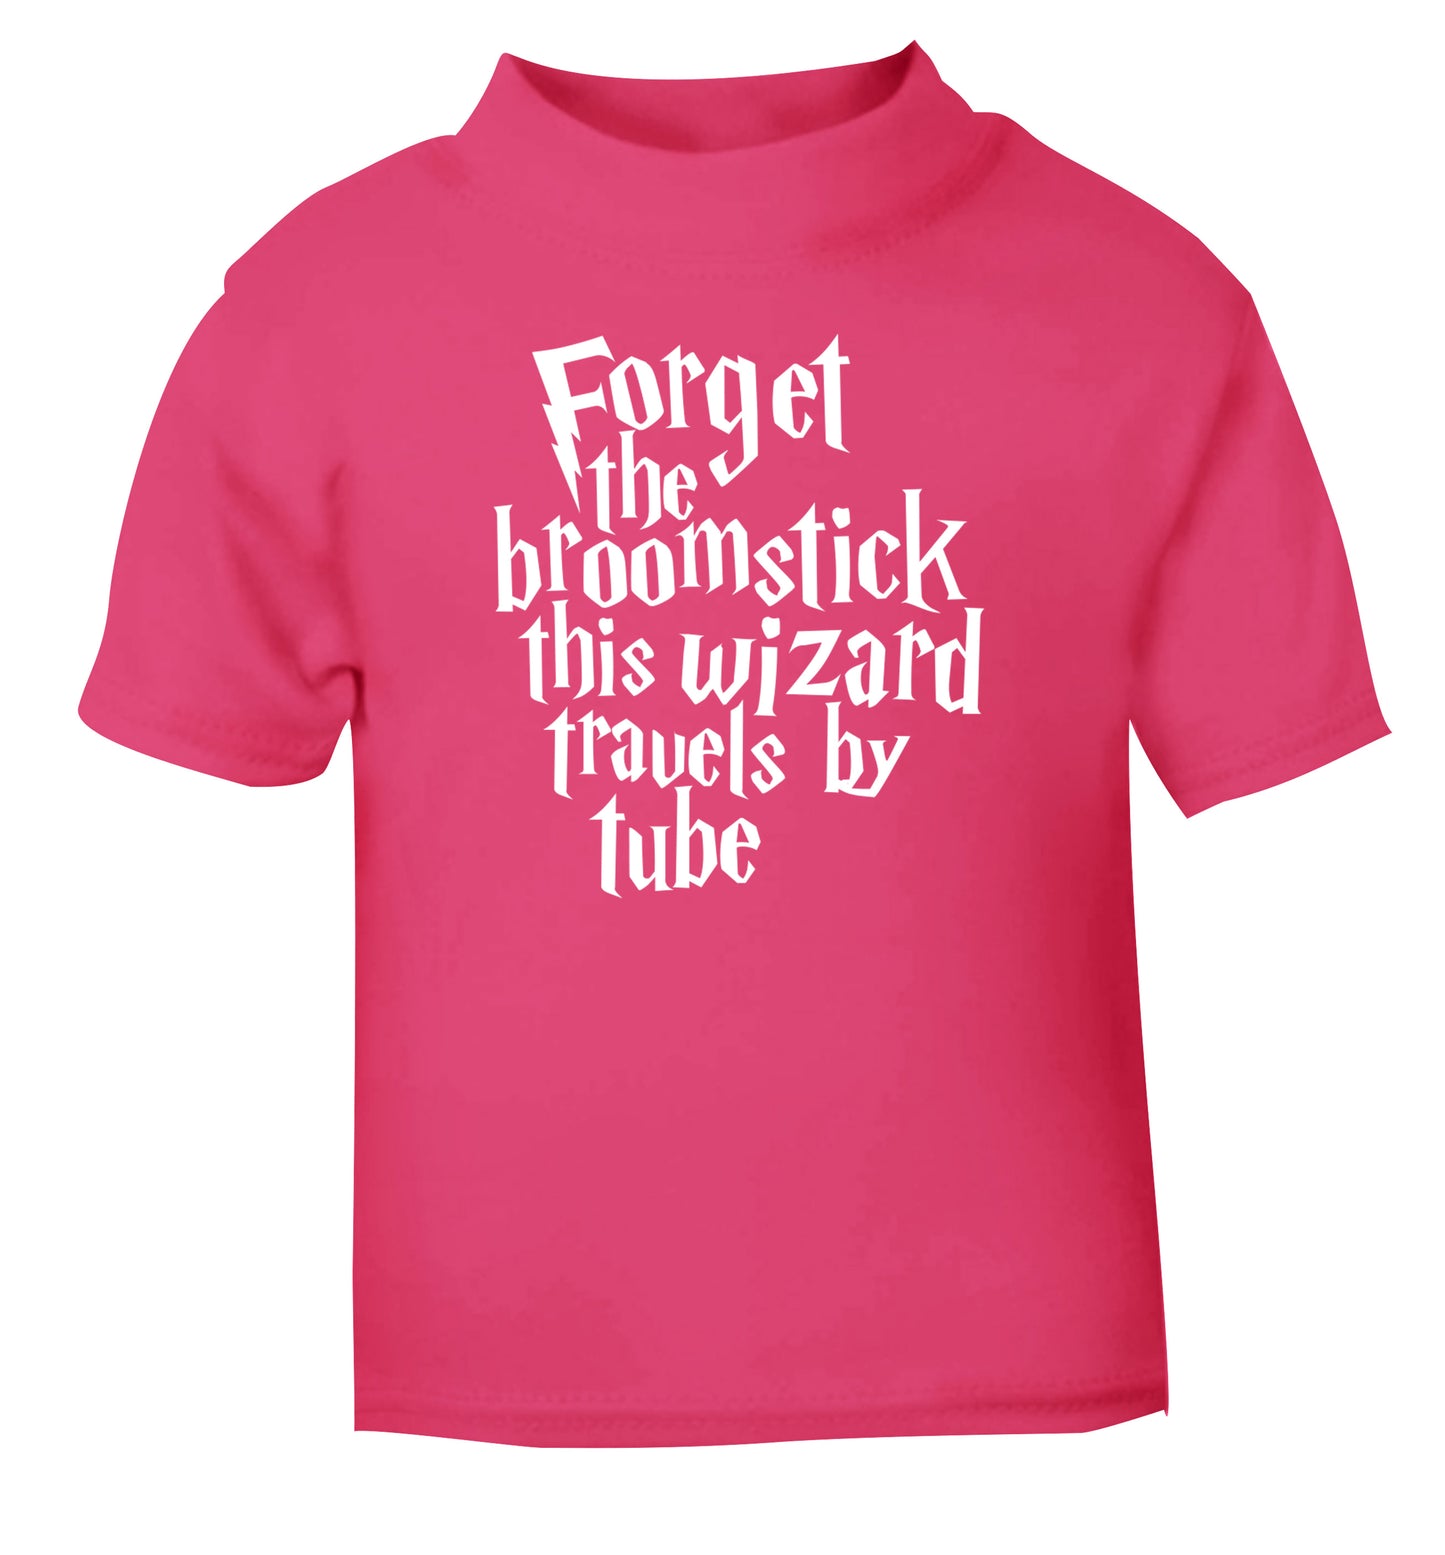 Forget the broomstick this wizard travels by tube pink Baby Toddler Tshirt 2 Years